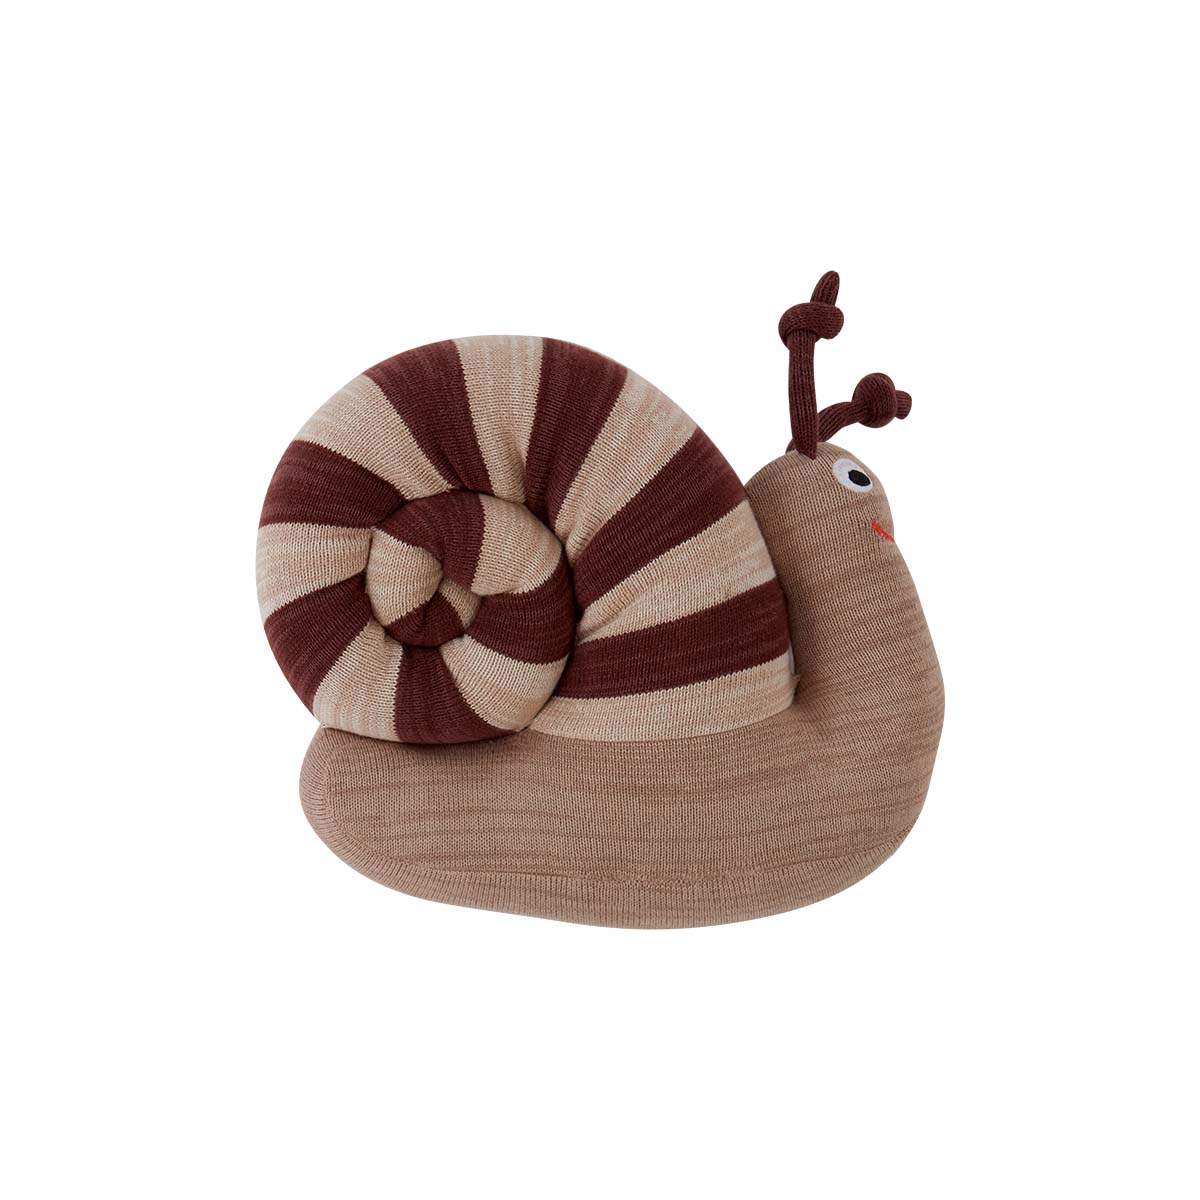 Laad afbeelding in Galerijviewer, OYOY MINI Sally Snail Soft Toys 301 Brown
